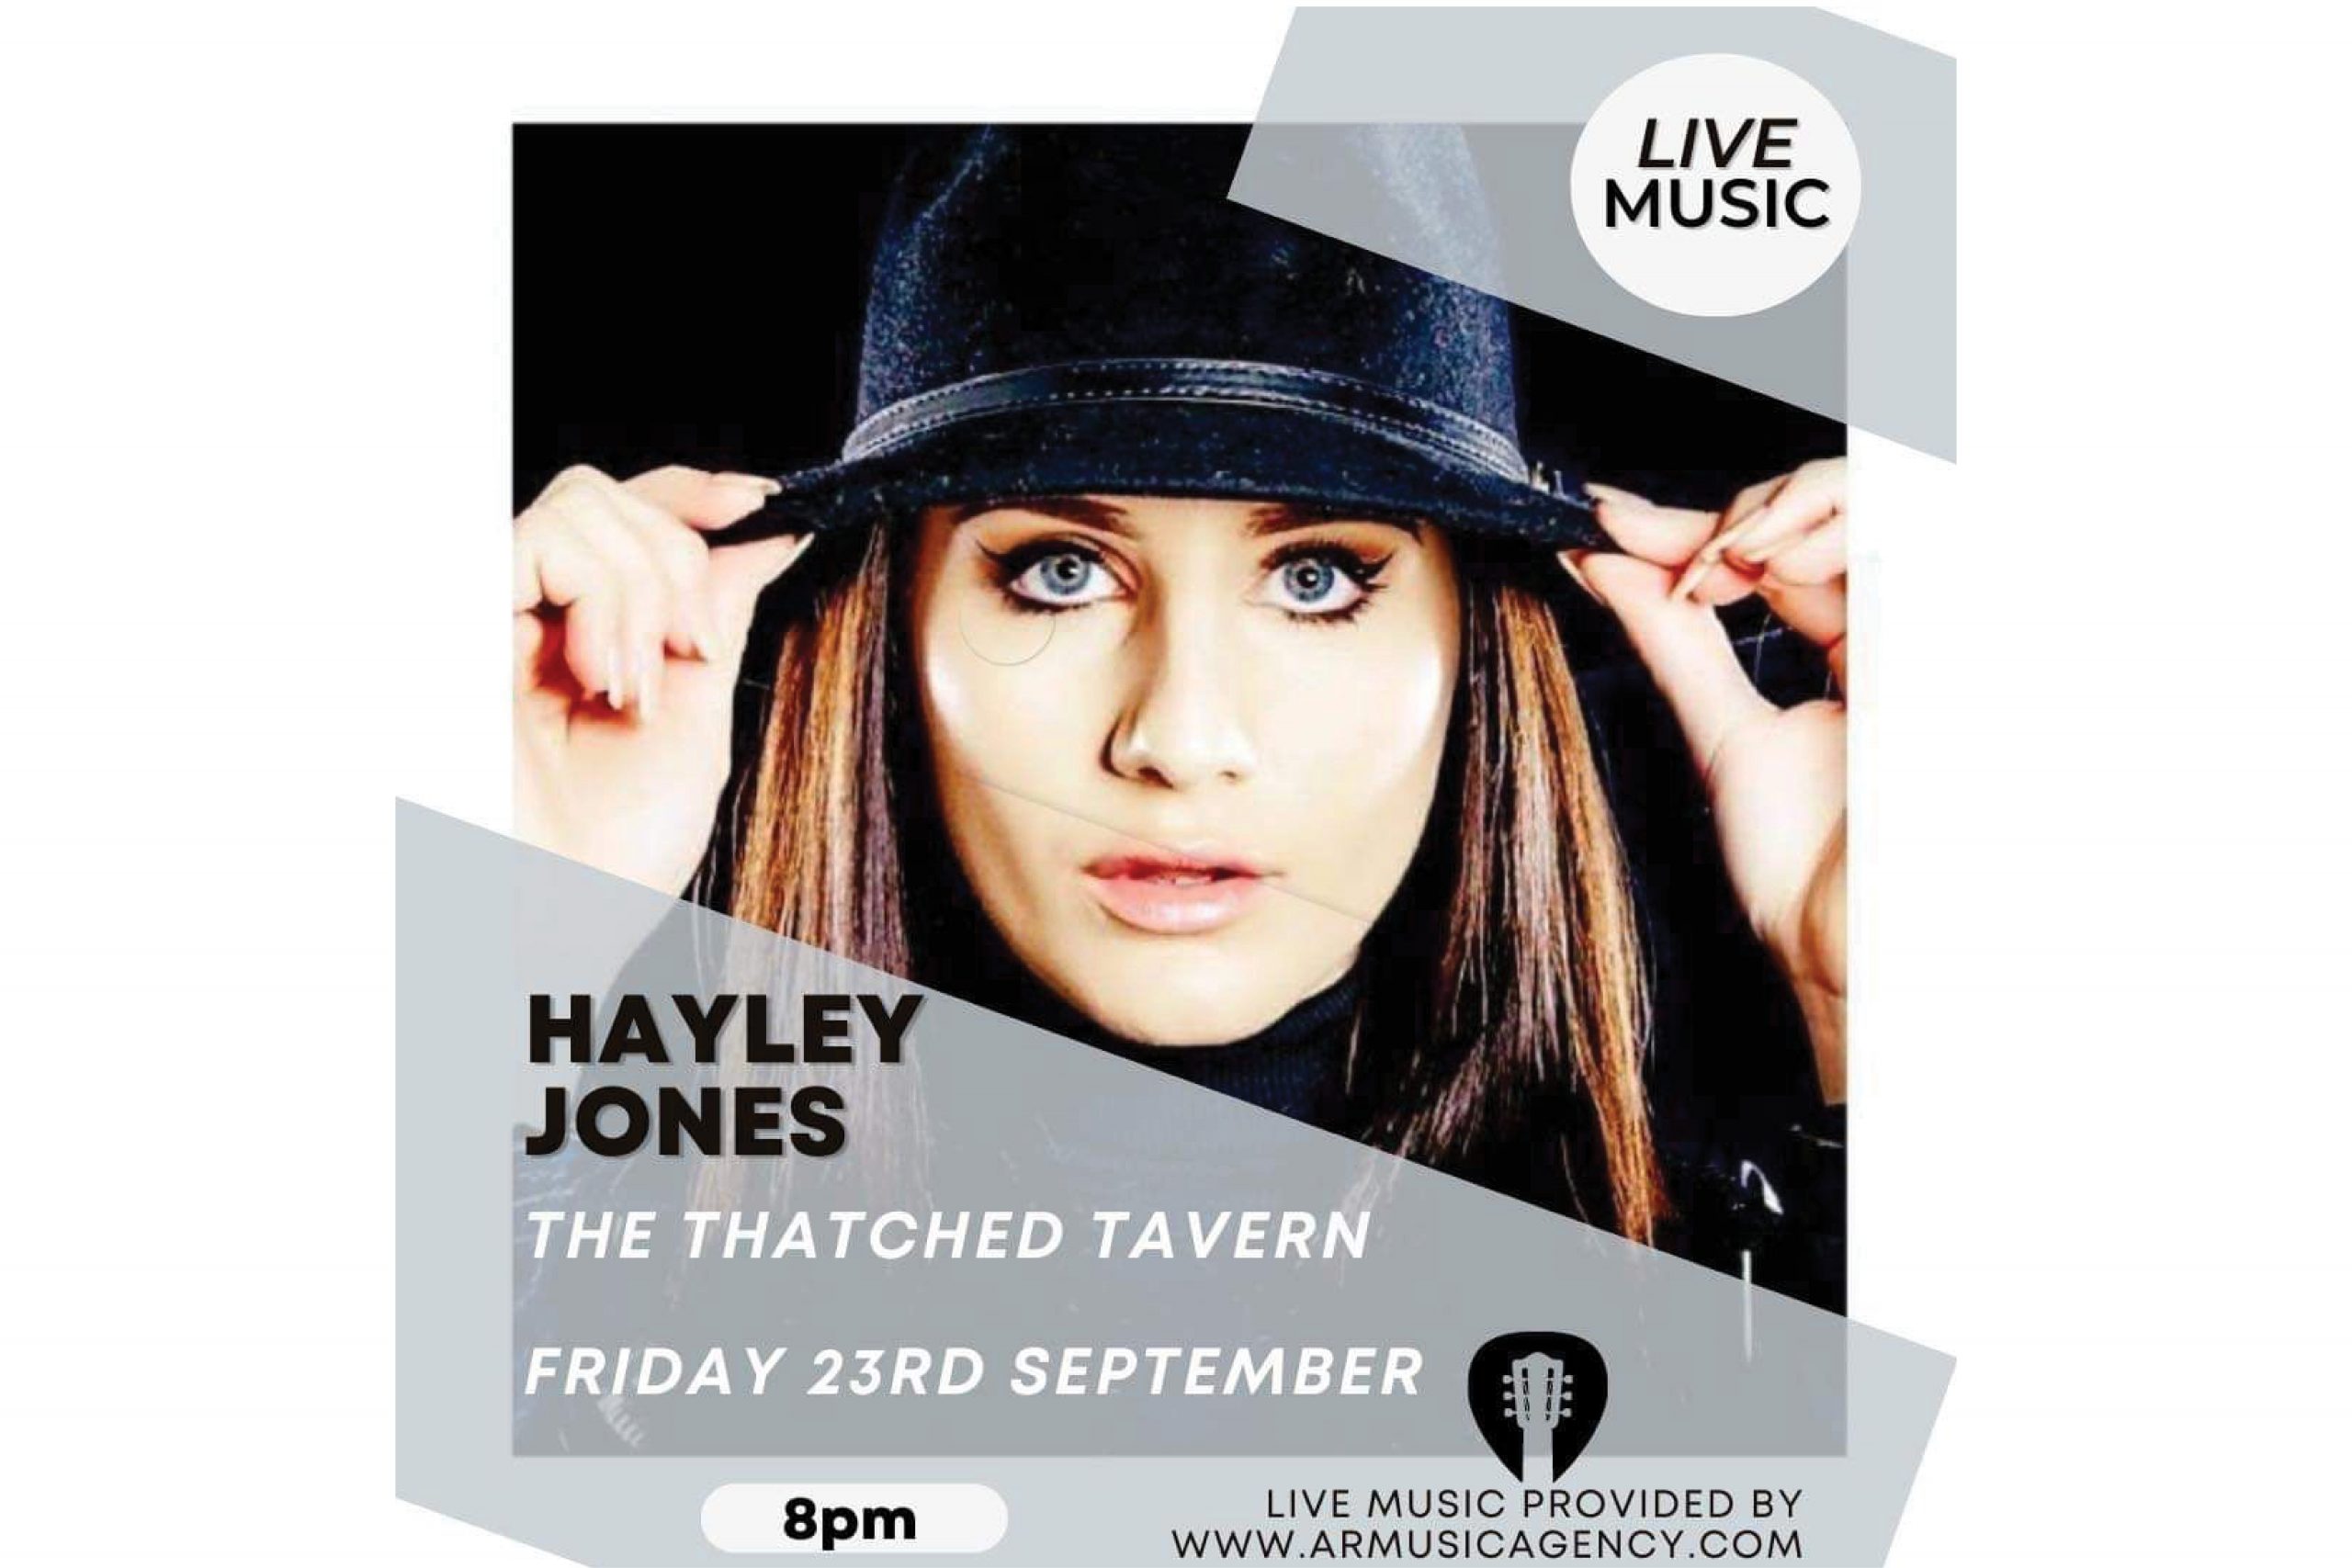 Live Music Hayley Jones at the Thatched Tavern Honeybourne 23rd September 2022